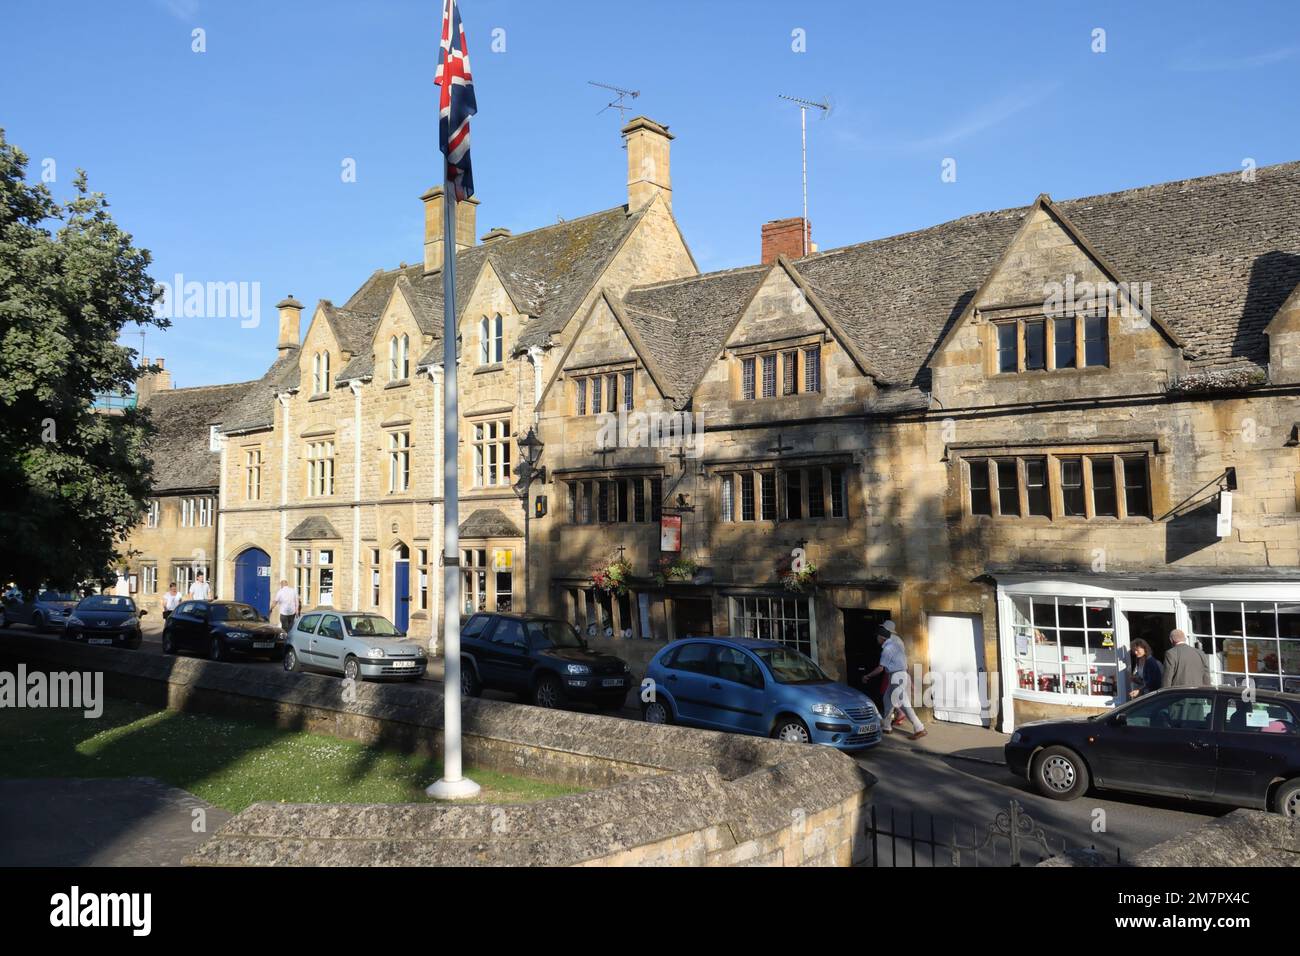 Buildings in High Street Chipping Campden England, Cotswold town Stock Photo